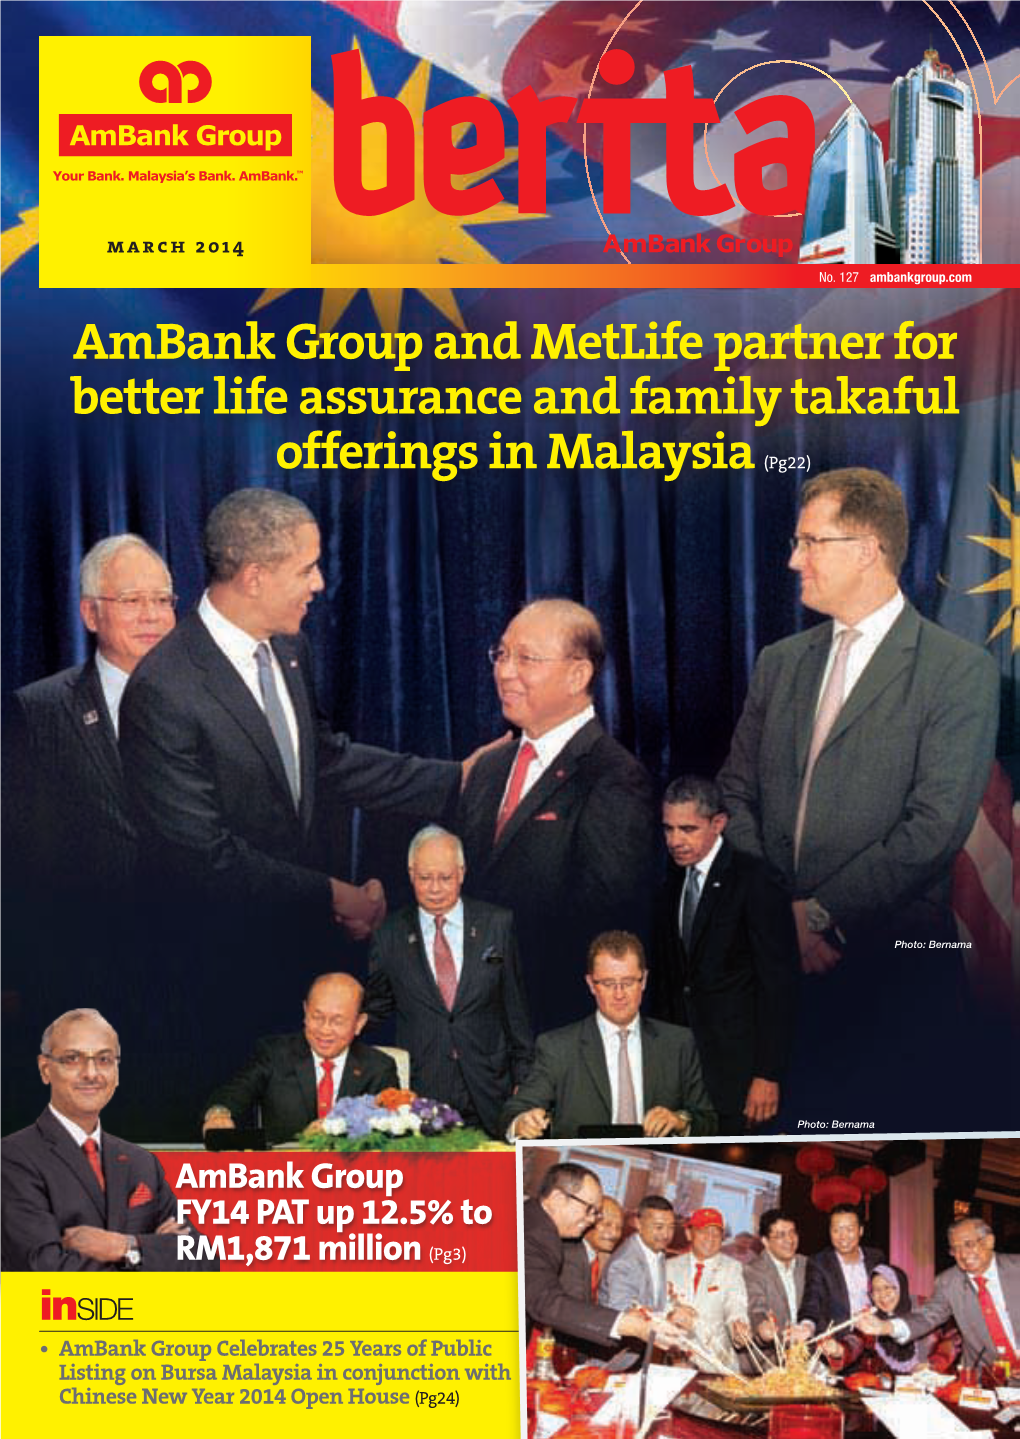 Ambank Group and Metlife Partner for Better Life Assurance and Family Takaful